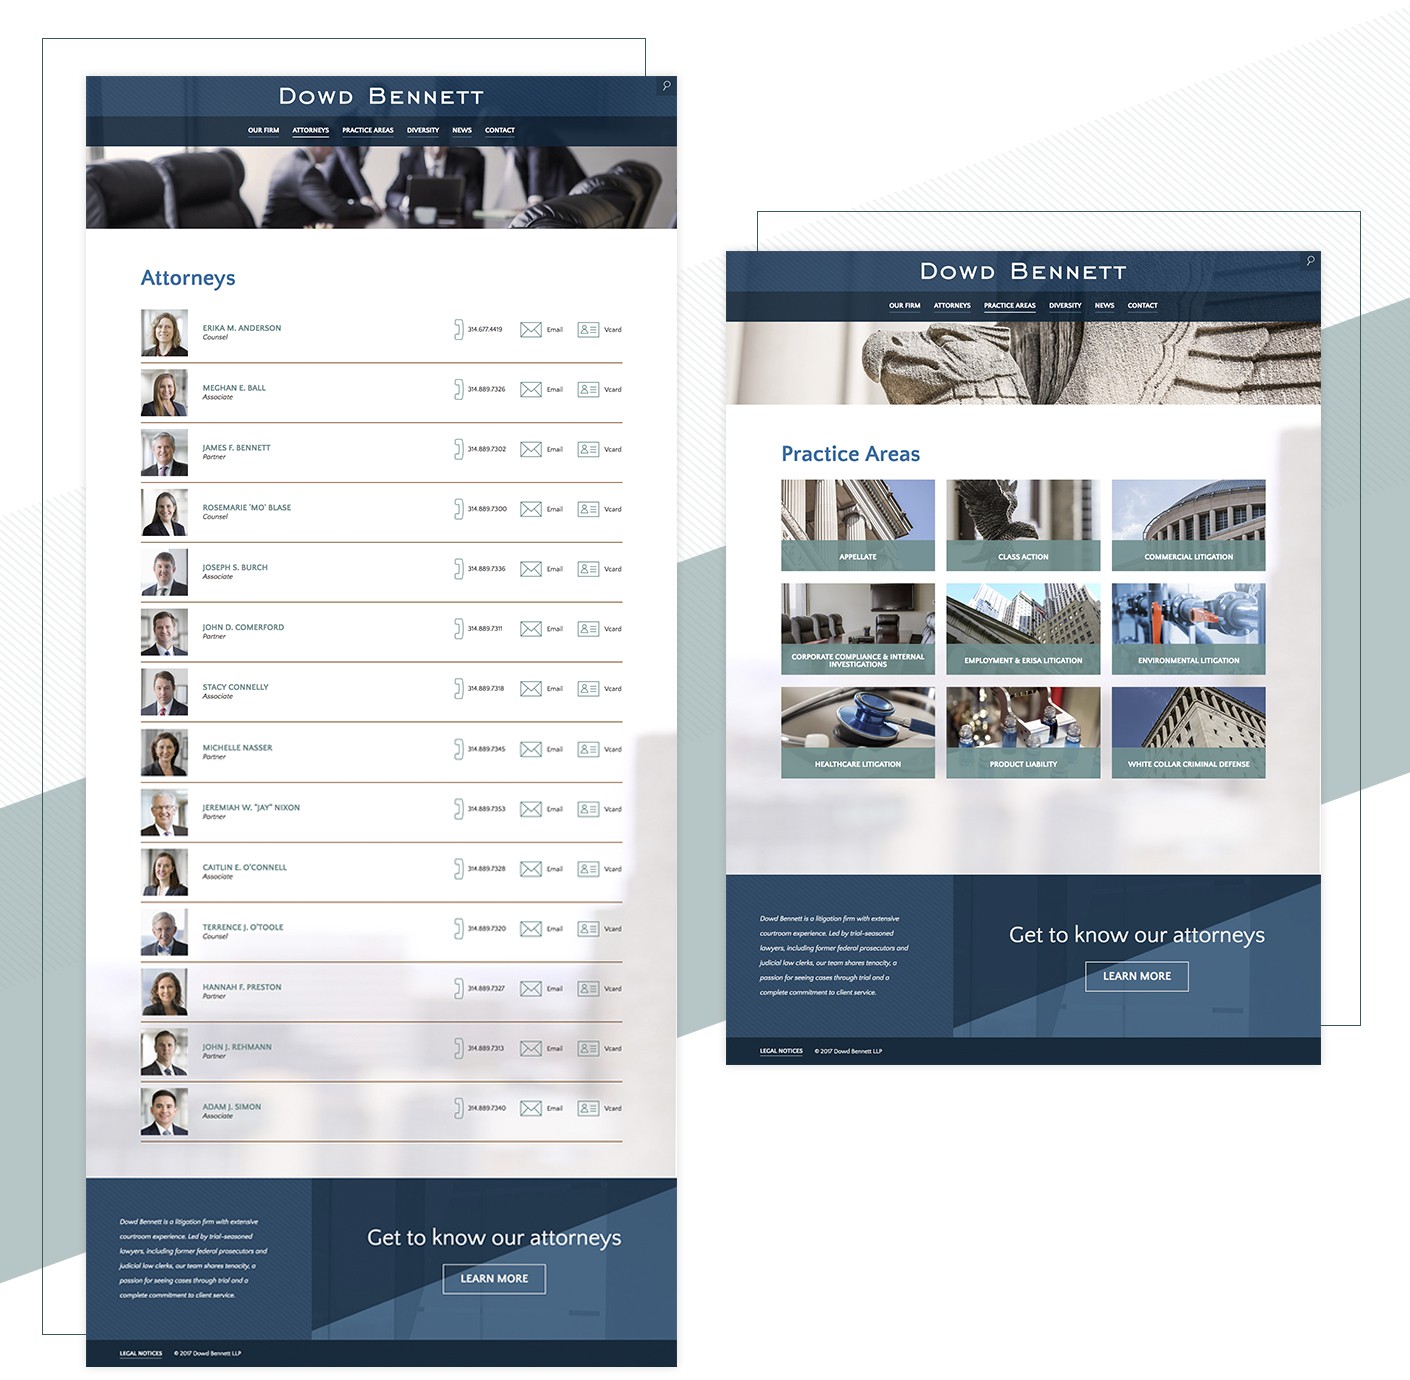 On the new Dowd Bennett web design features and extensive attorney directory and shows architectural elements of the firm in its photography choices.